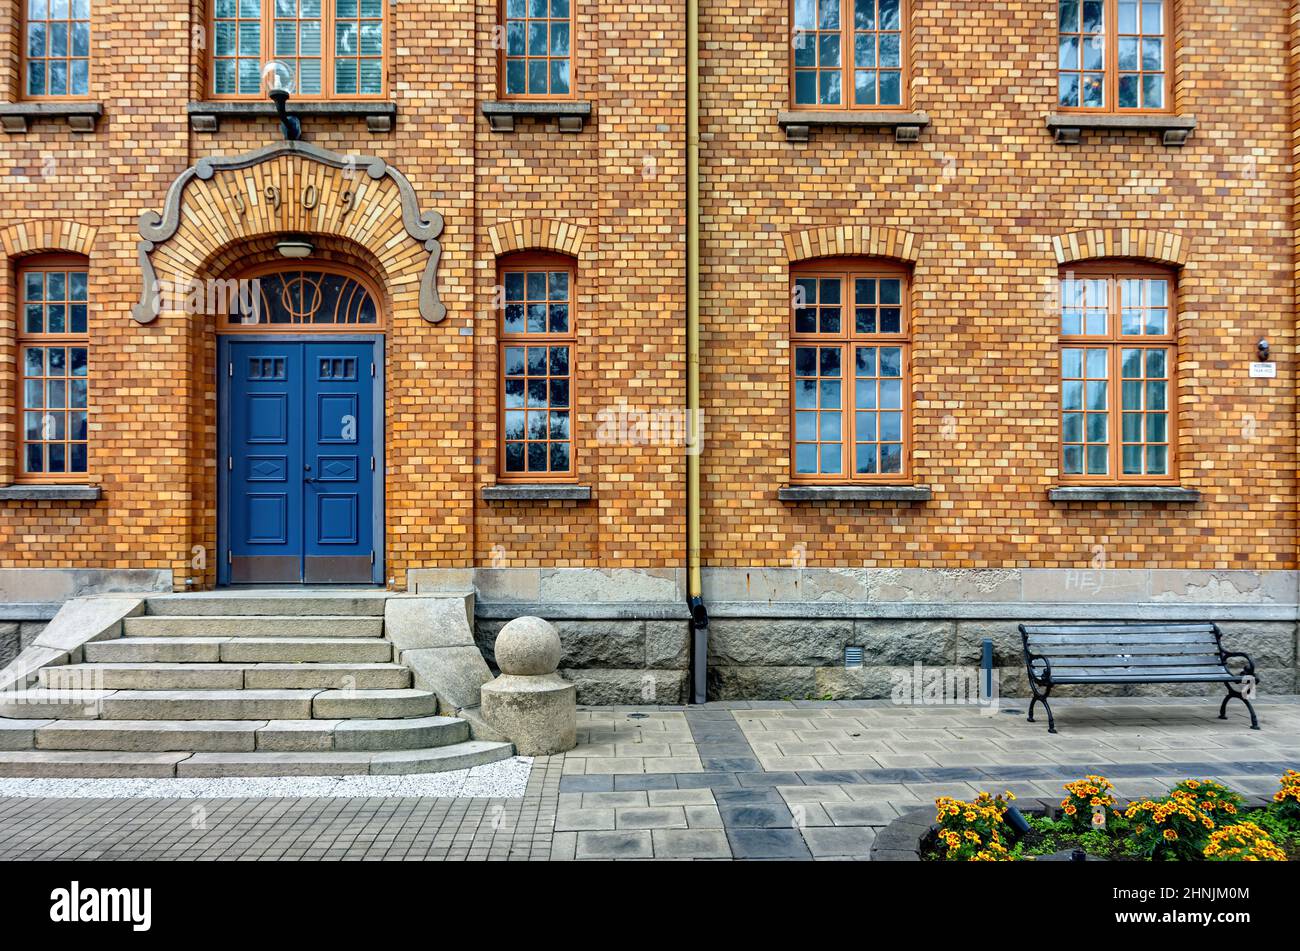 Mellerud, Dalsland, Västra Götalands län, Sweden: The Mellerud Museum on the West side of Lake Vänern, located in the courthouse from 1909. Stock Photo